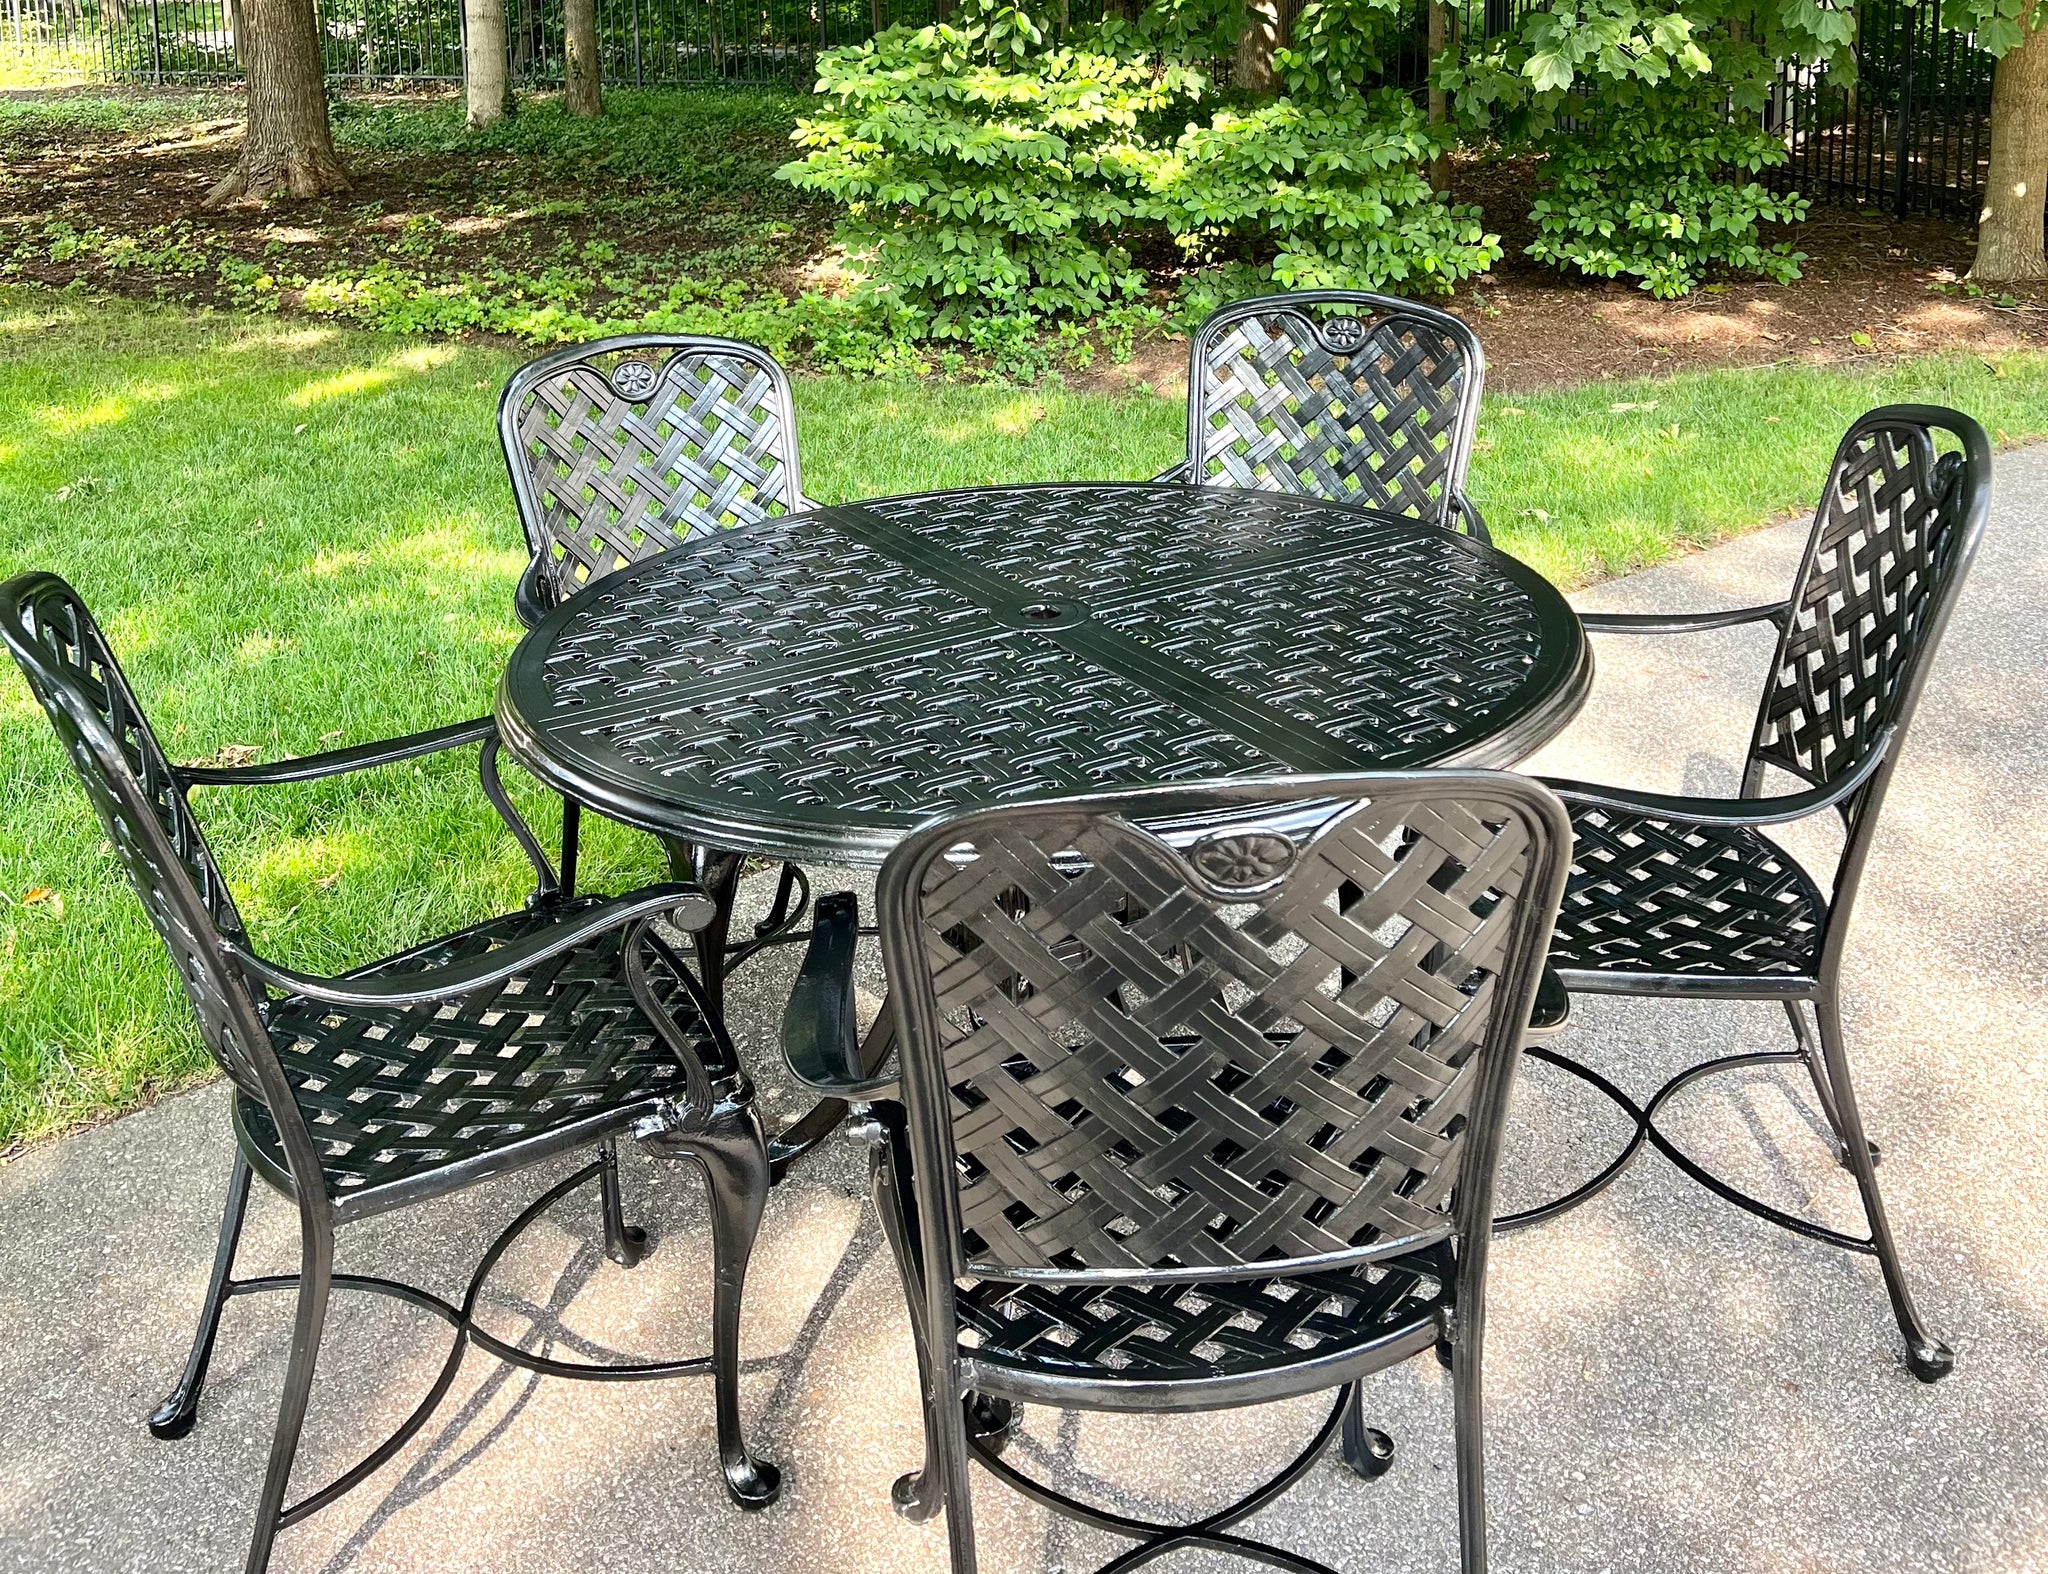 Smith & Hawken Monaco 48" Round Cast Aluminum Patio Table and 5 Chairs